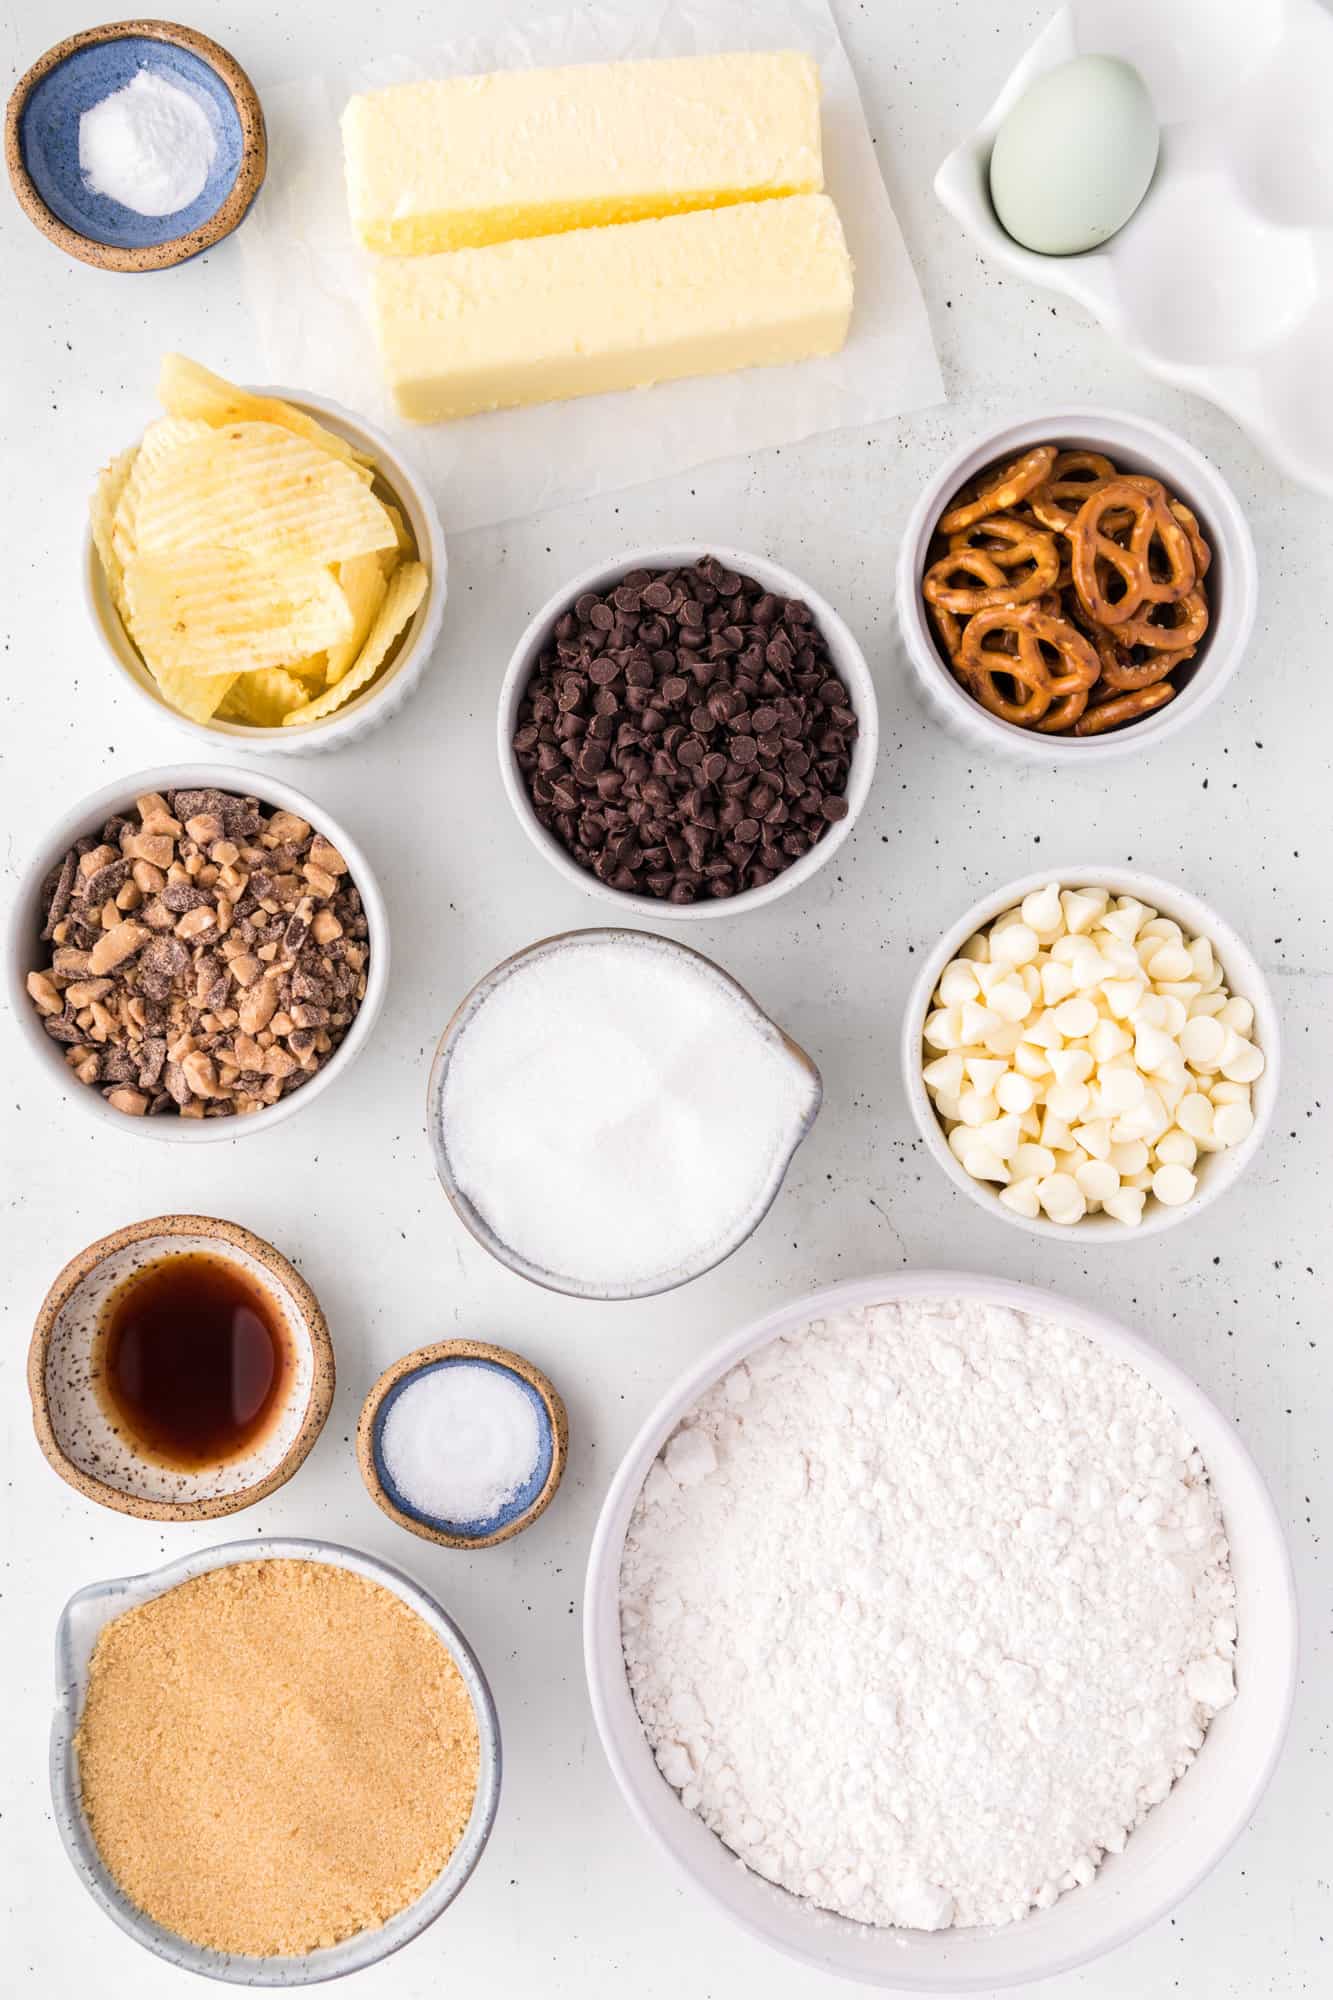 The ingredients for kitchen sink cookies.